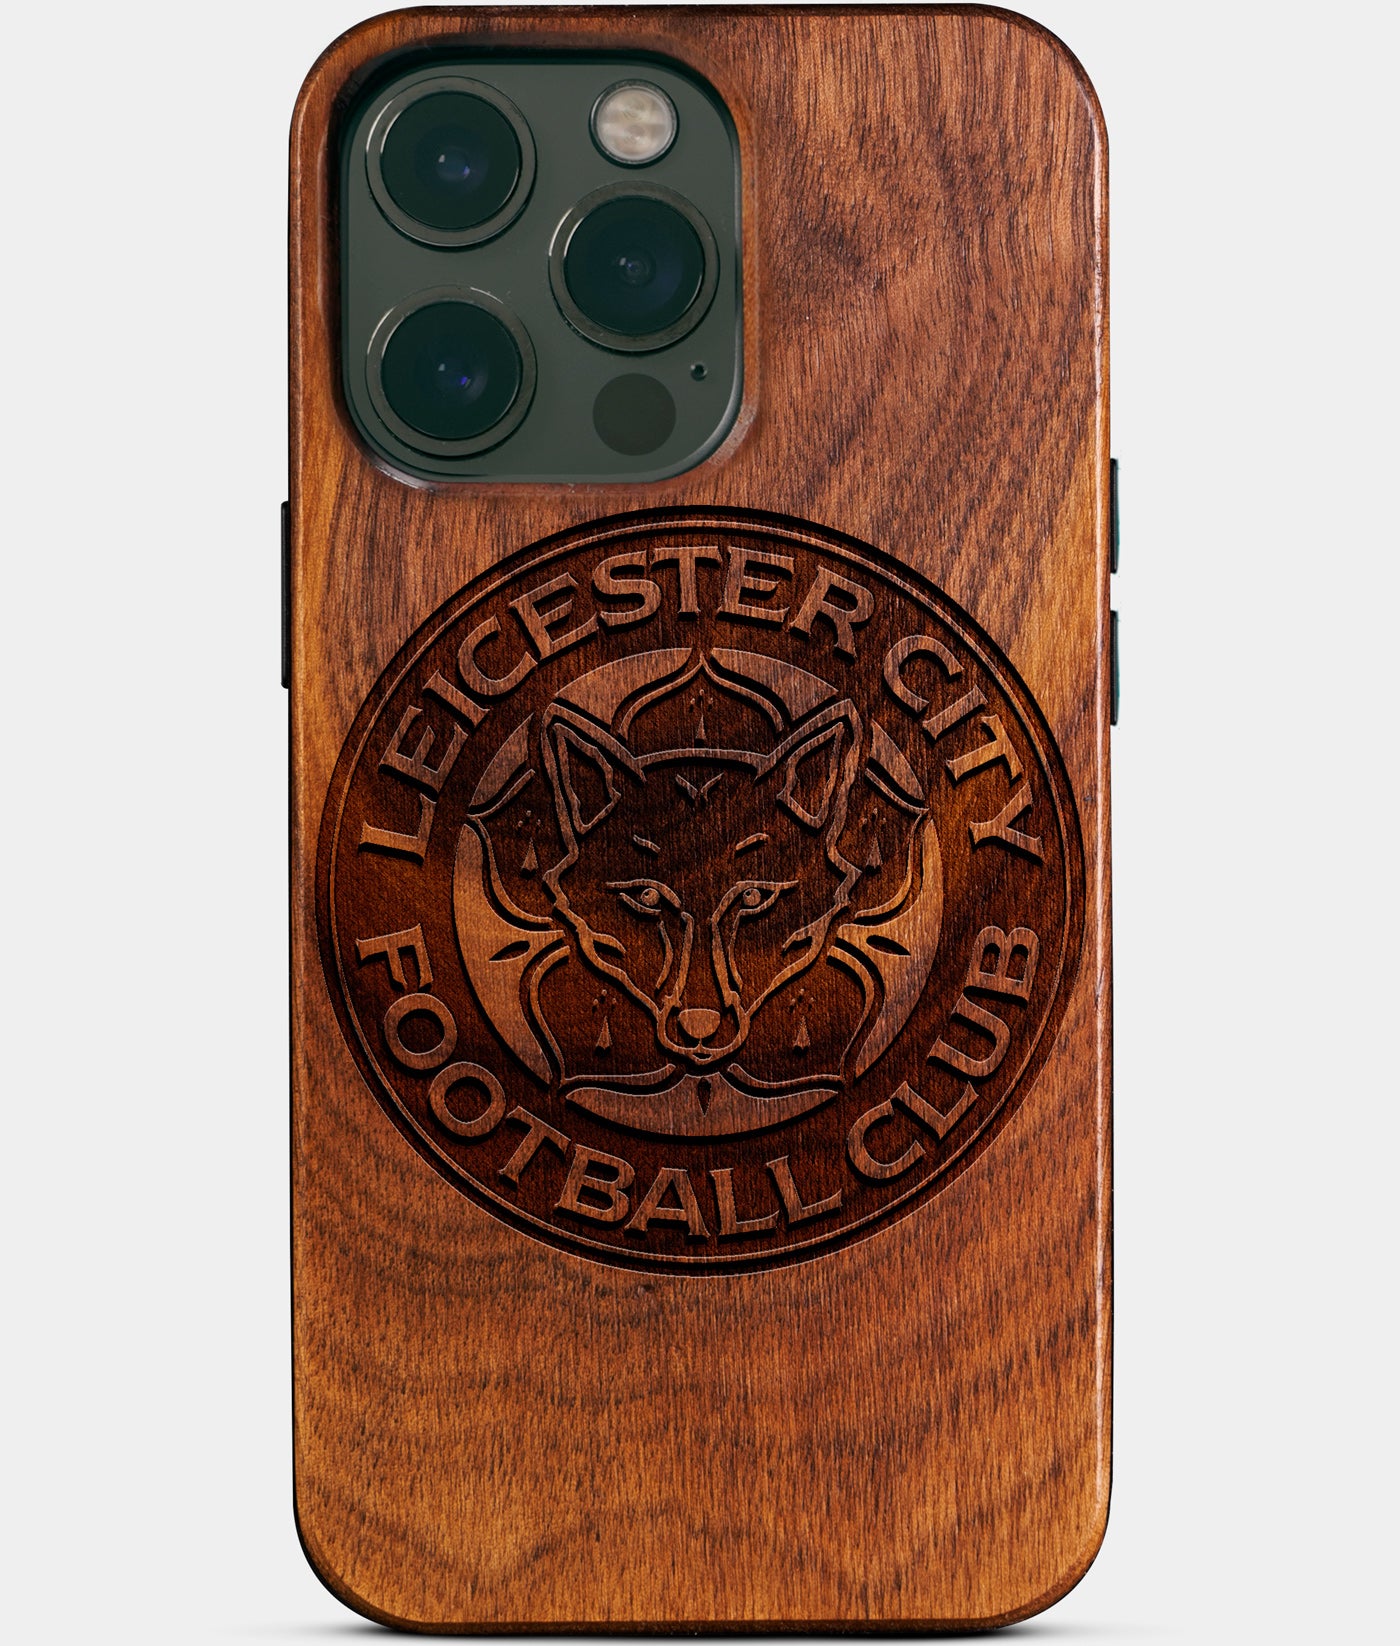 Custom Leicester City FC iPhone 14/14 Pro/14 Pro Max/14 Plus Case - Carved Wood Leicester City FC Cover - Leicester City FC Birthday Christmas Gifts - iPhone 14 Case - Custom Leicester City FC Gift For Him - Leicester City FC Gifts For Men - 2022 Carved Wood Custom England Football Gift For Him - Monogrammed unusual UK football gifts iPhone 14 | iPhone 14 Pro | 14 Plus Covers | iPhone 13 | iPhone 13 Pro | iPhone 13 Pro Max | iPhone 12 Pro Max | iPhone 12 By by Engraved In Nature